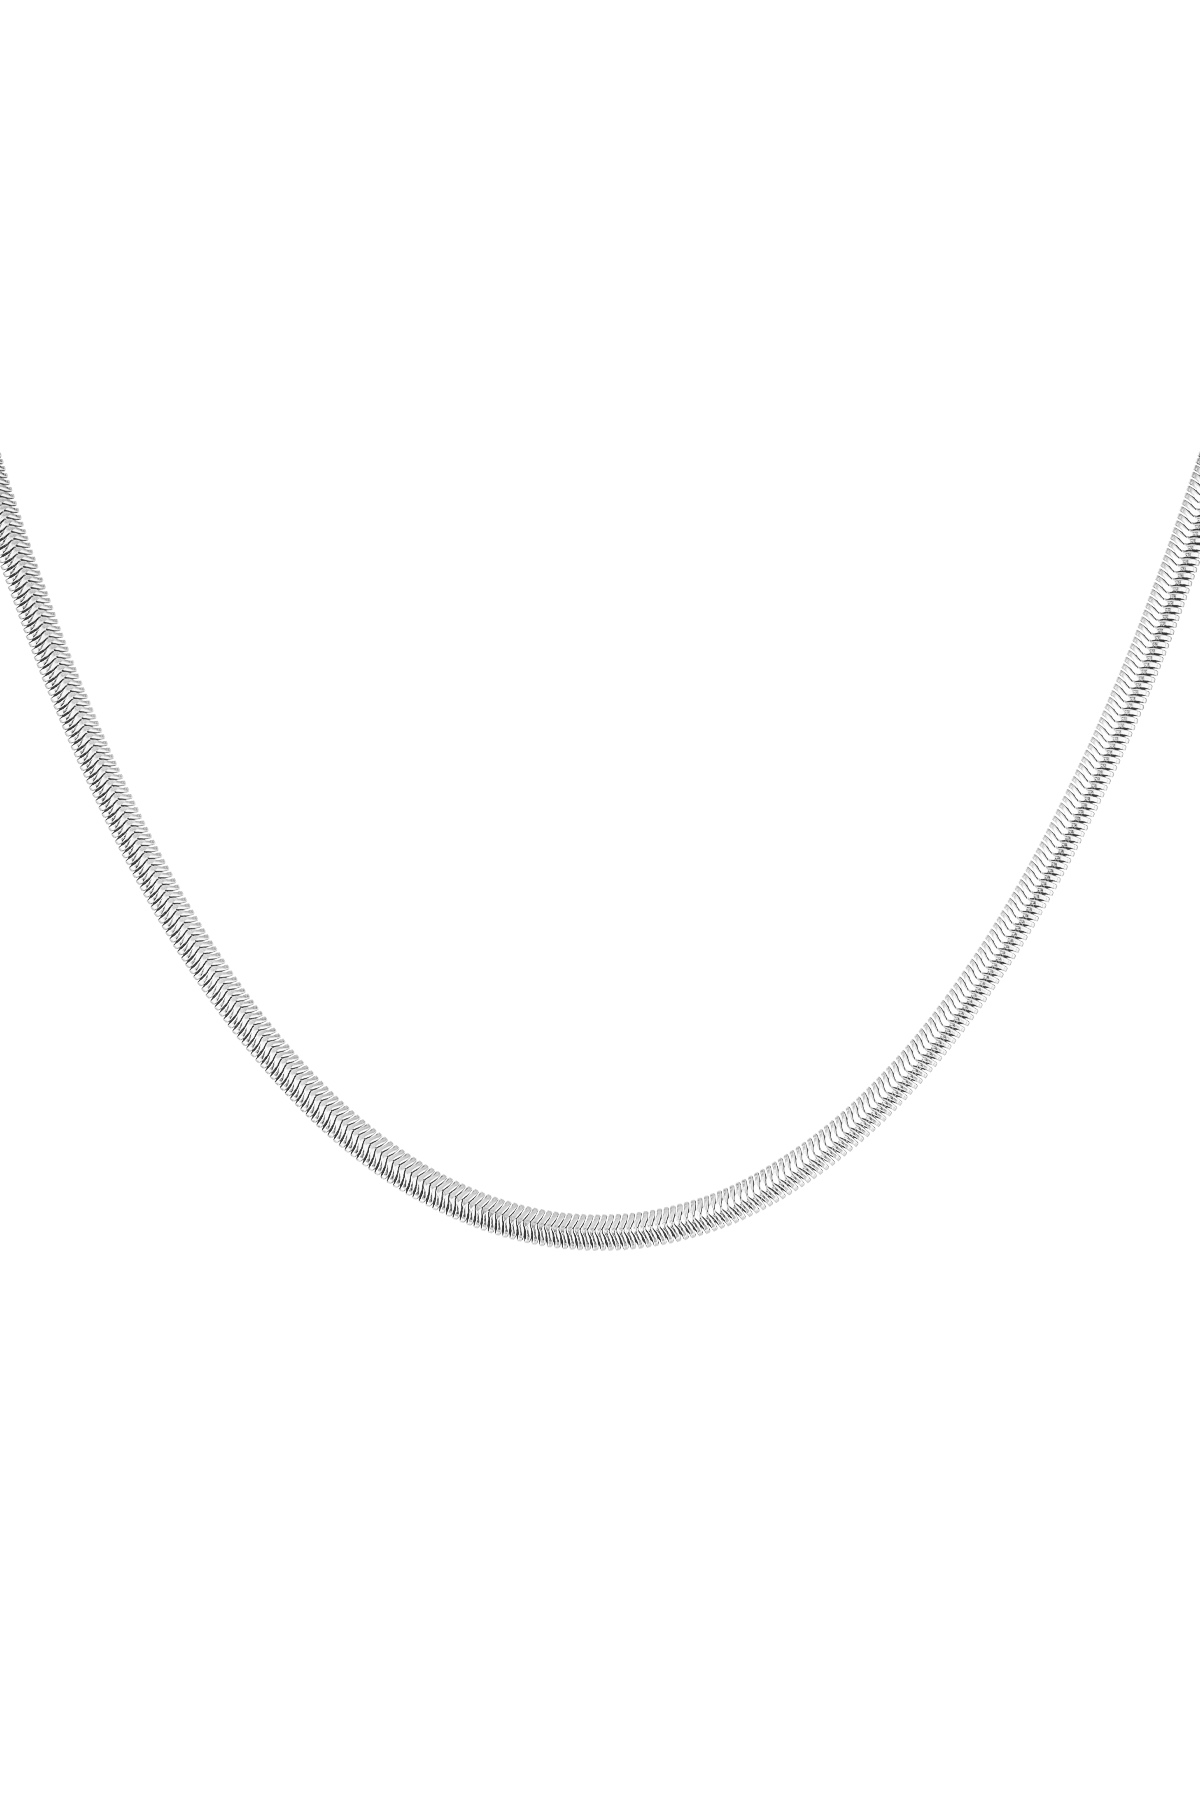 Necklace flat with print - silver-4.0MM